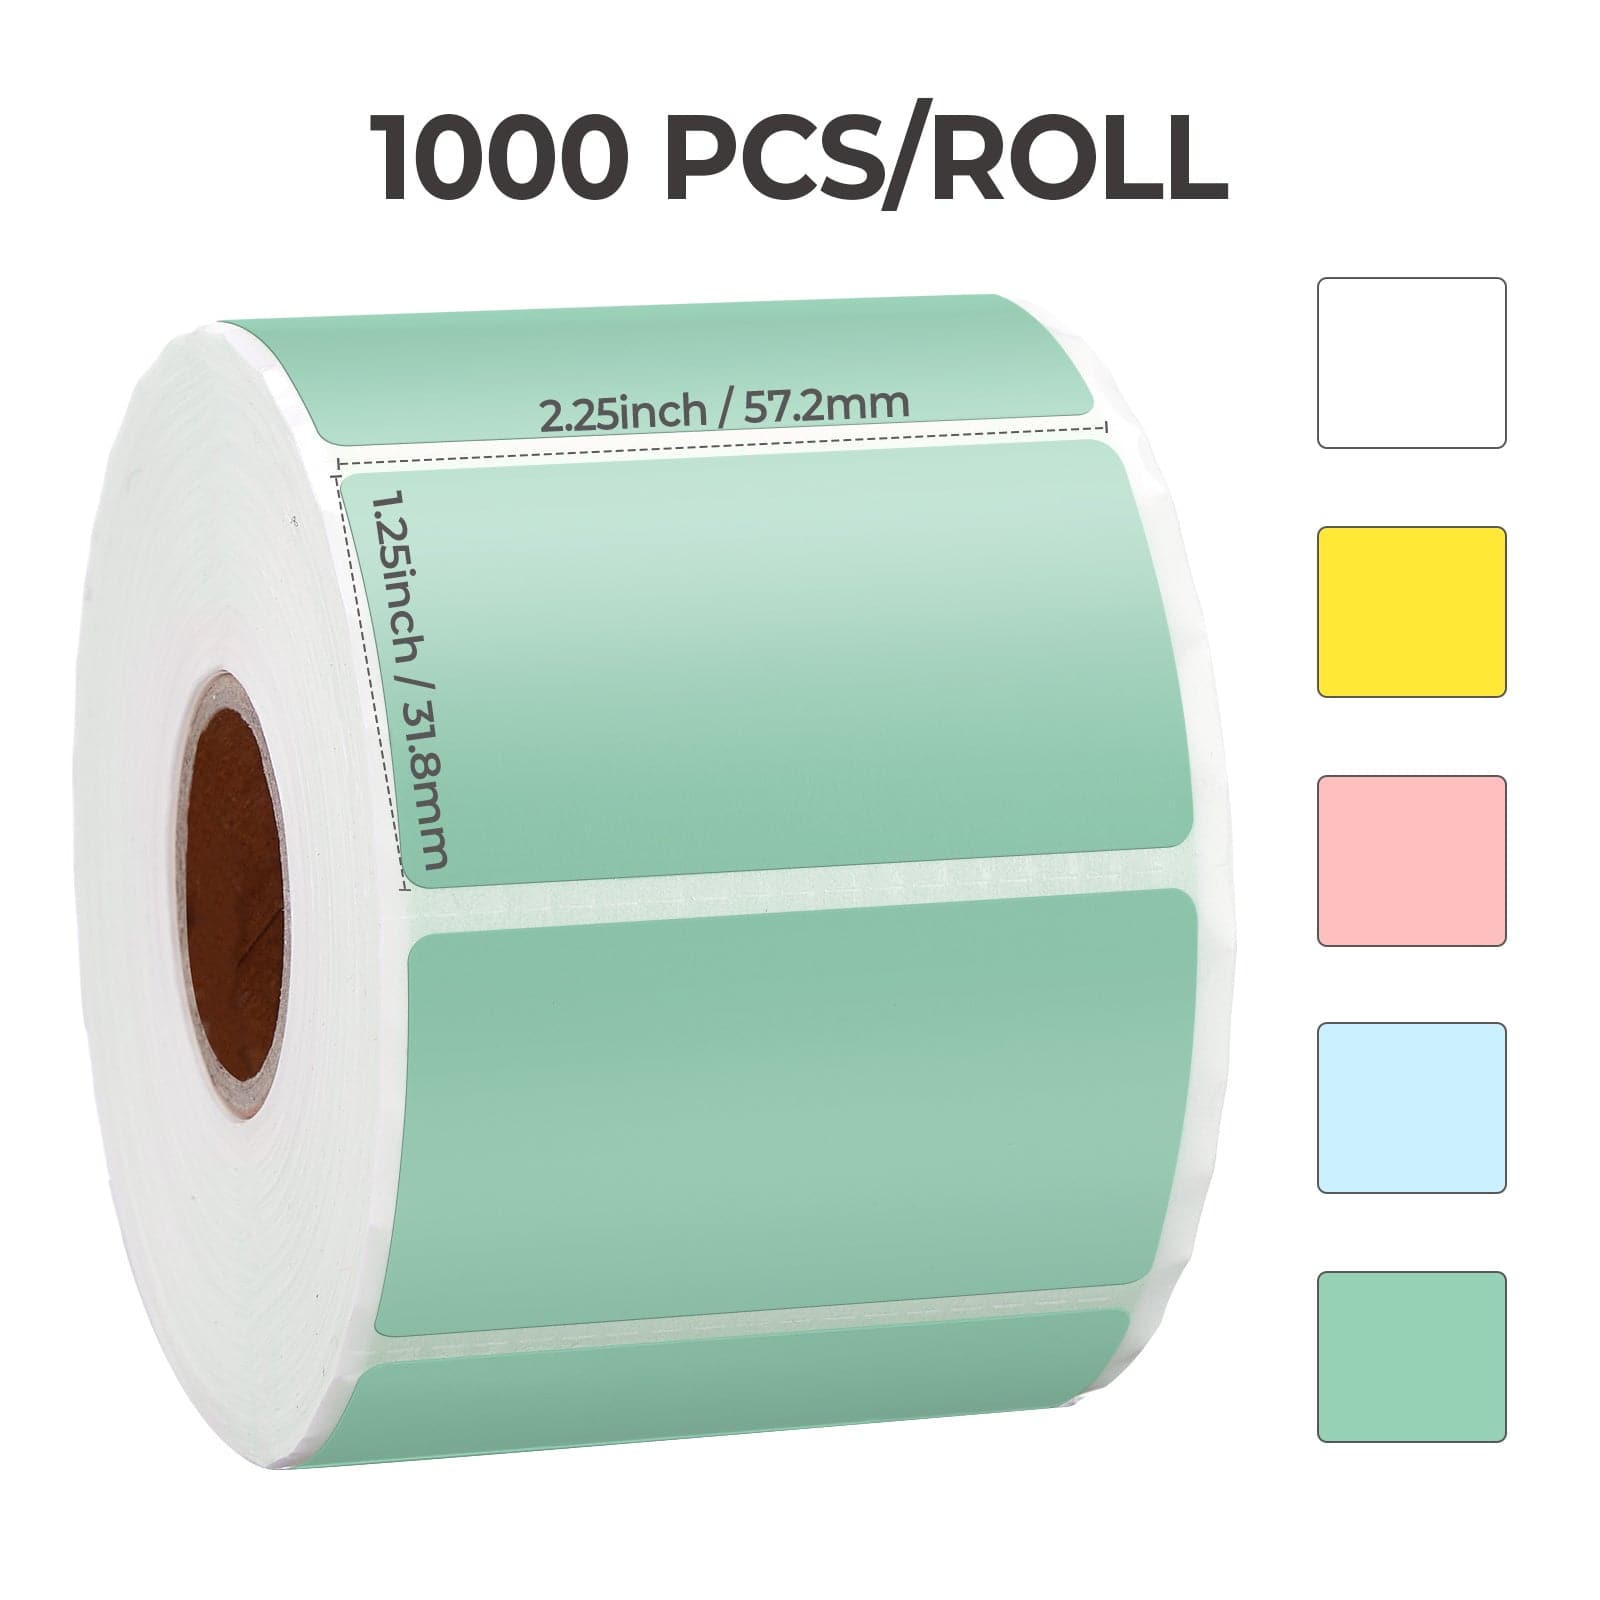 Lab Labeling Tape Variety Pack, 500 Inches Long x 3/4 inch Width, 1 inch Diameter Core [5 Rolls of Assorted Colors] for Color Coding and Marking